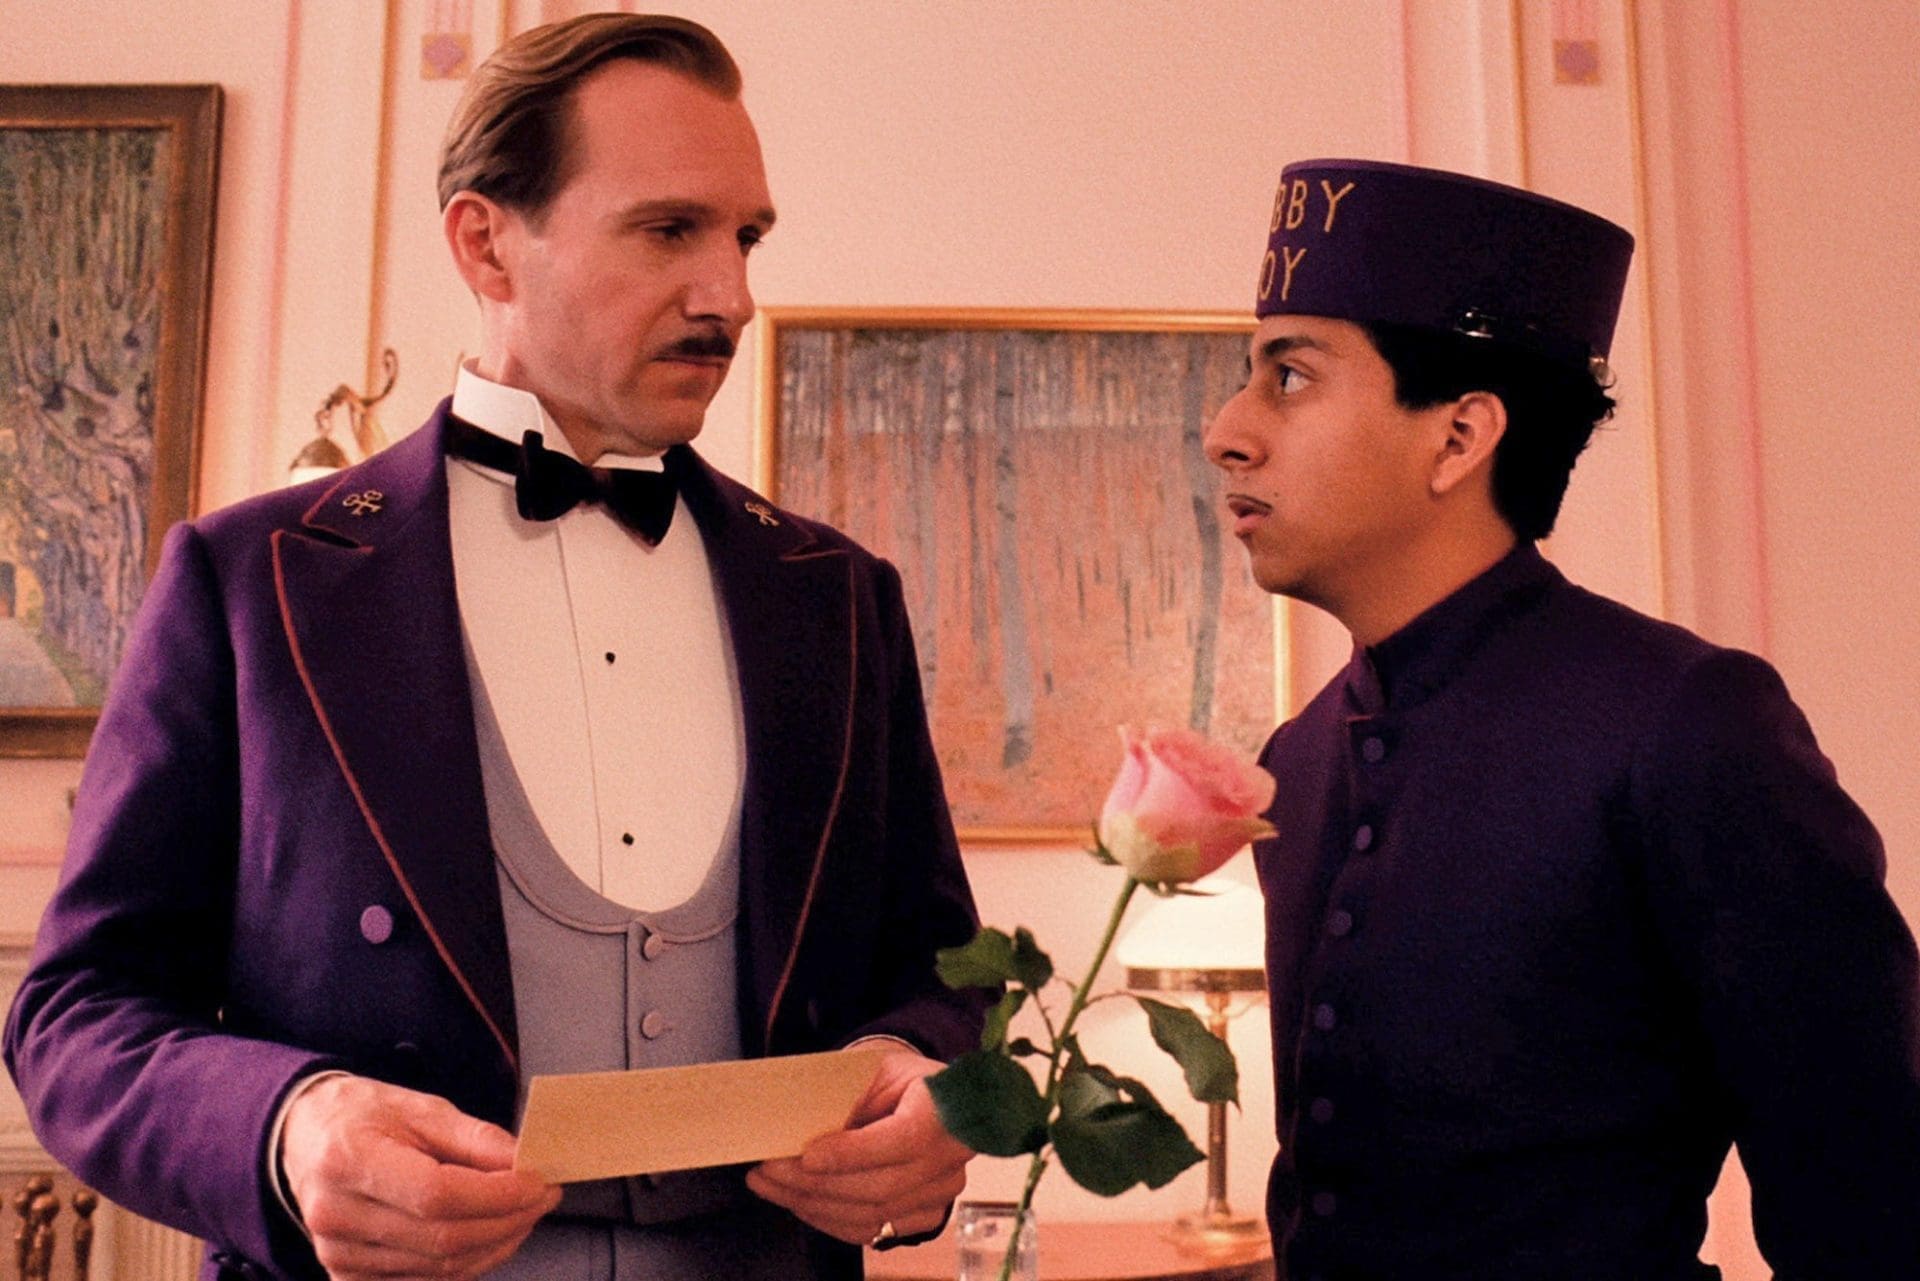 F. Murray Abraham, grand budapest hotel, Mathieu Amalric, Ralph Fiennes, wes anderson